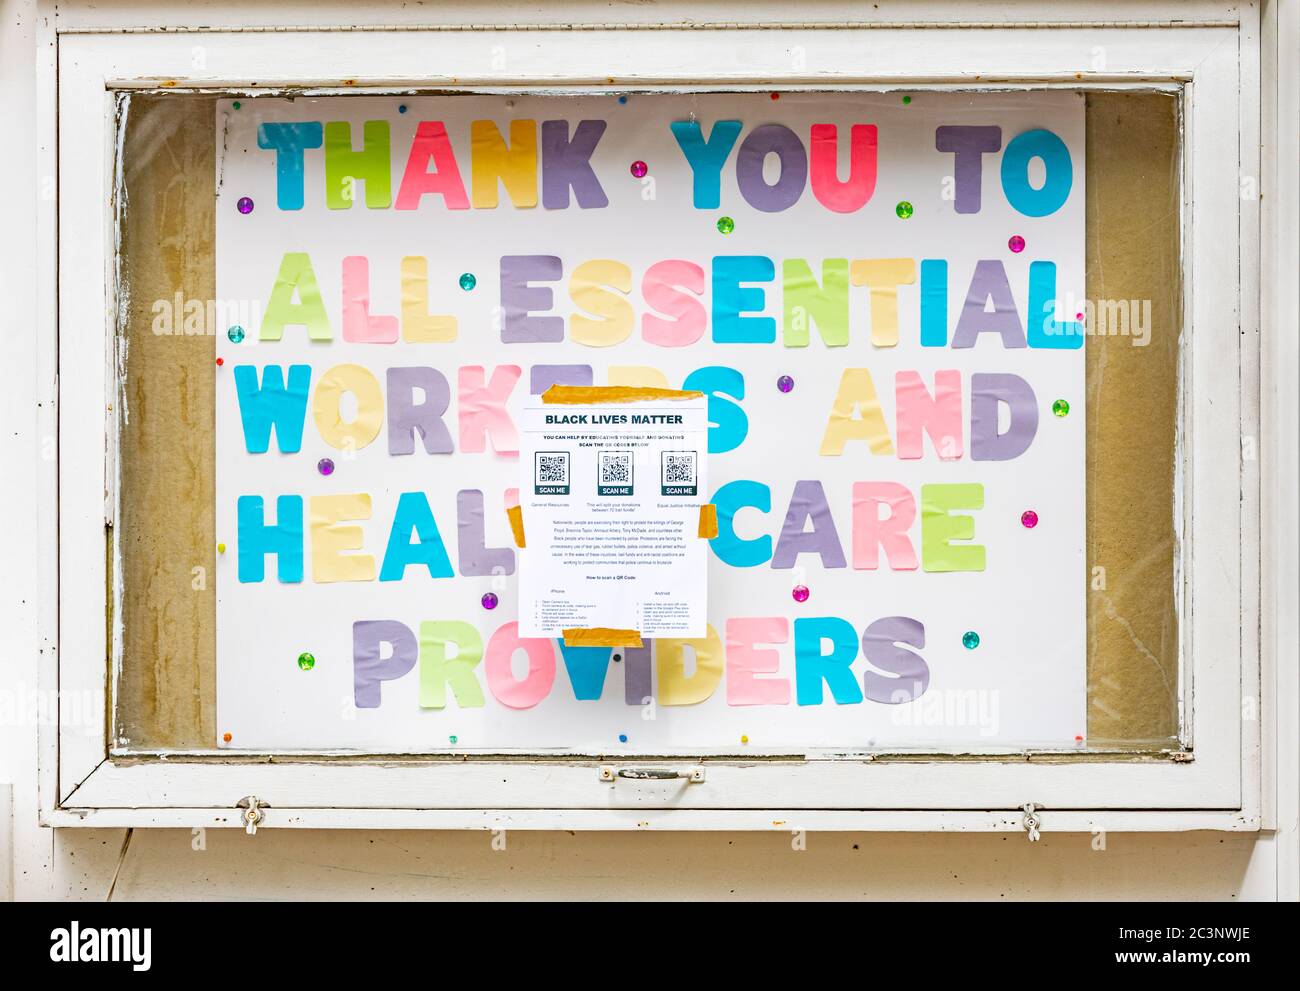 Hand made sign thanking all essential workers and health care providers Stock Photo